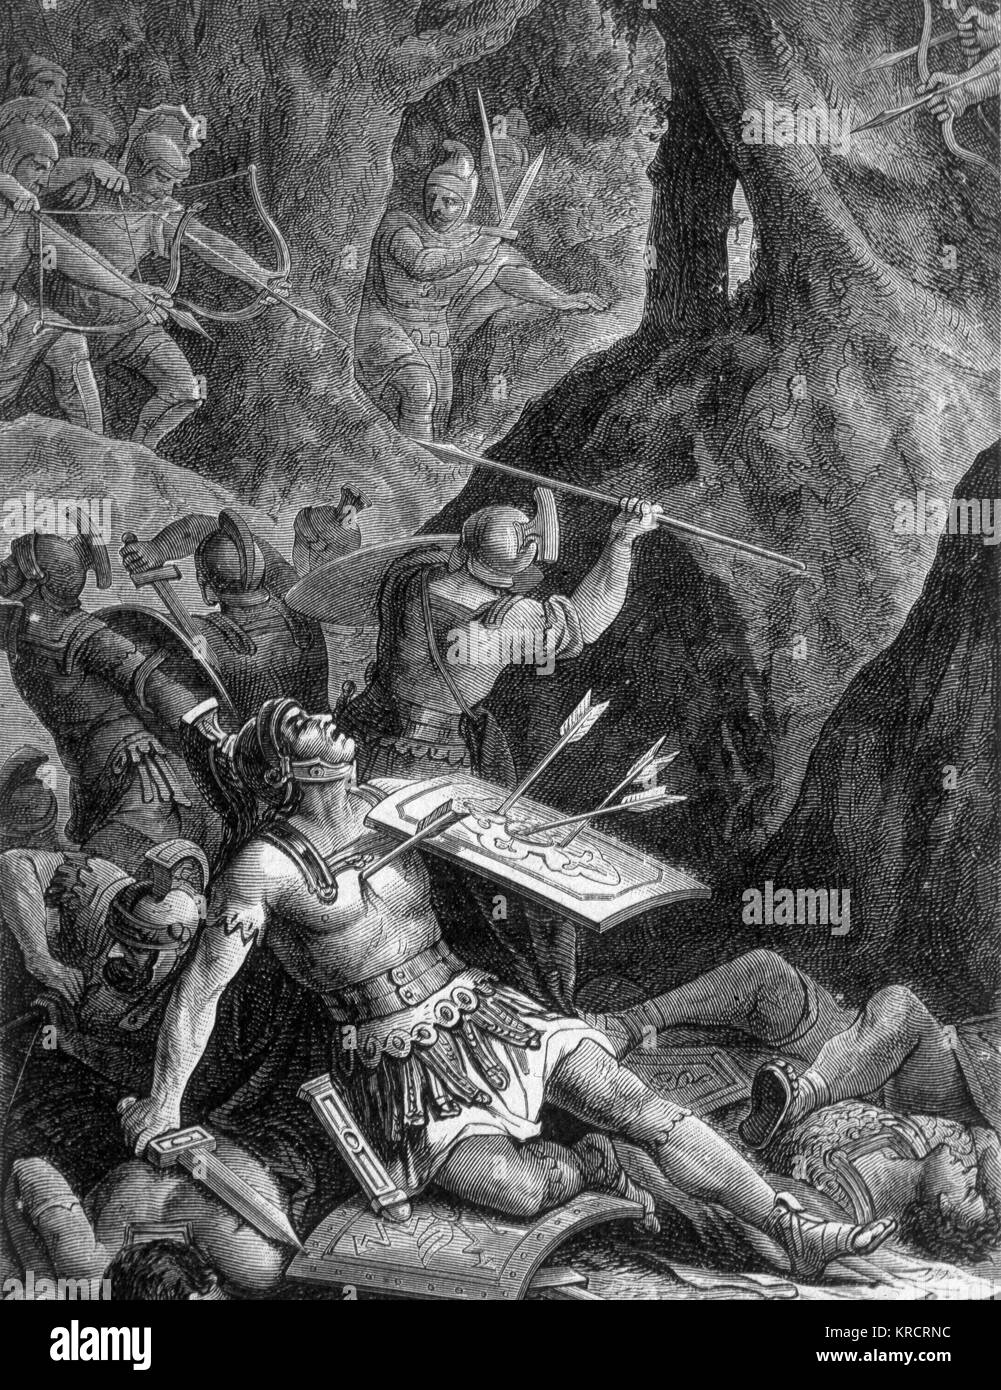 SECOND PUNIC WAR : Tiberius Sempronius Gracchus, Roman Republican consul, is ambushed and killed, along with some of his men, by Carthaginian soldiers. Date: 212 BC Stock Photo